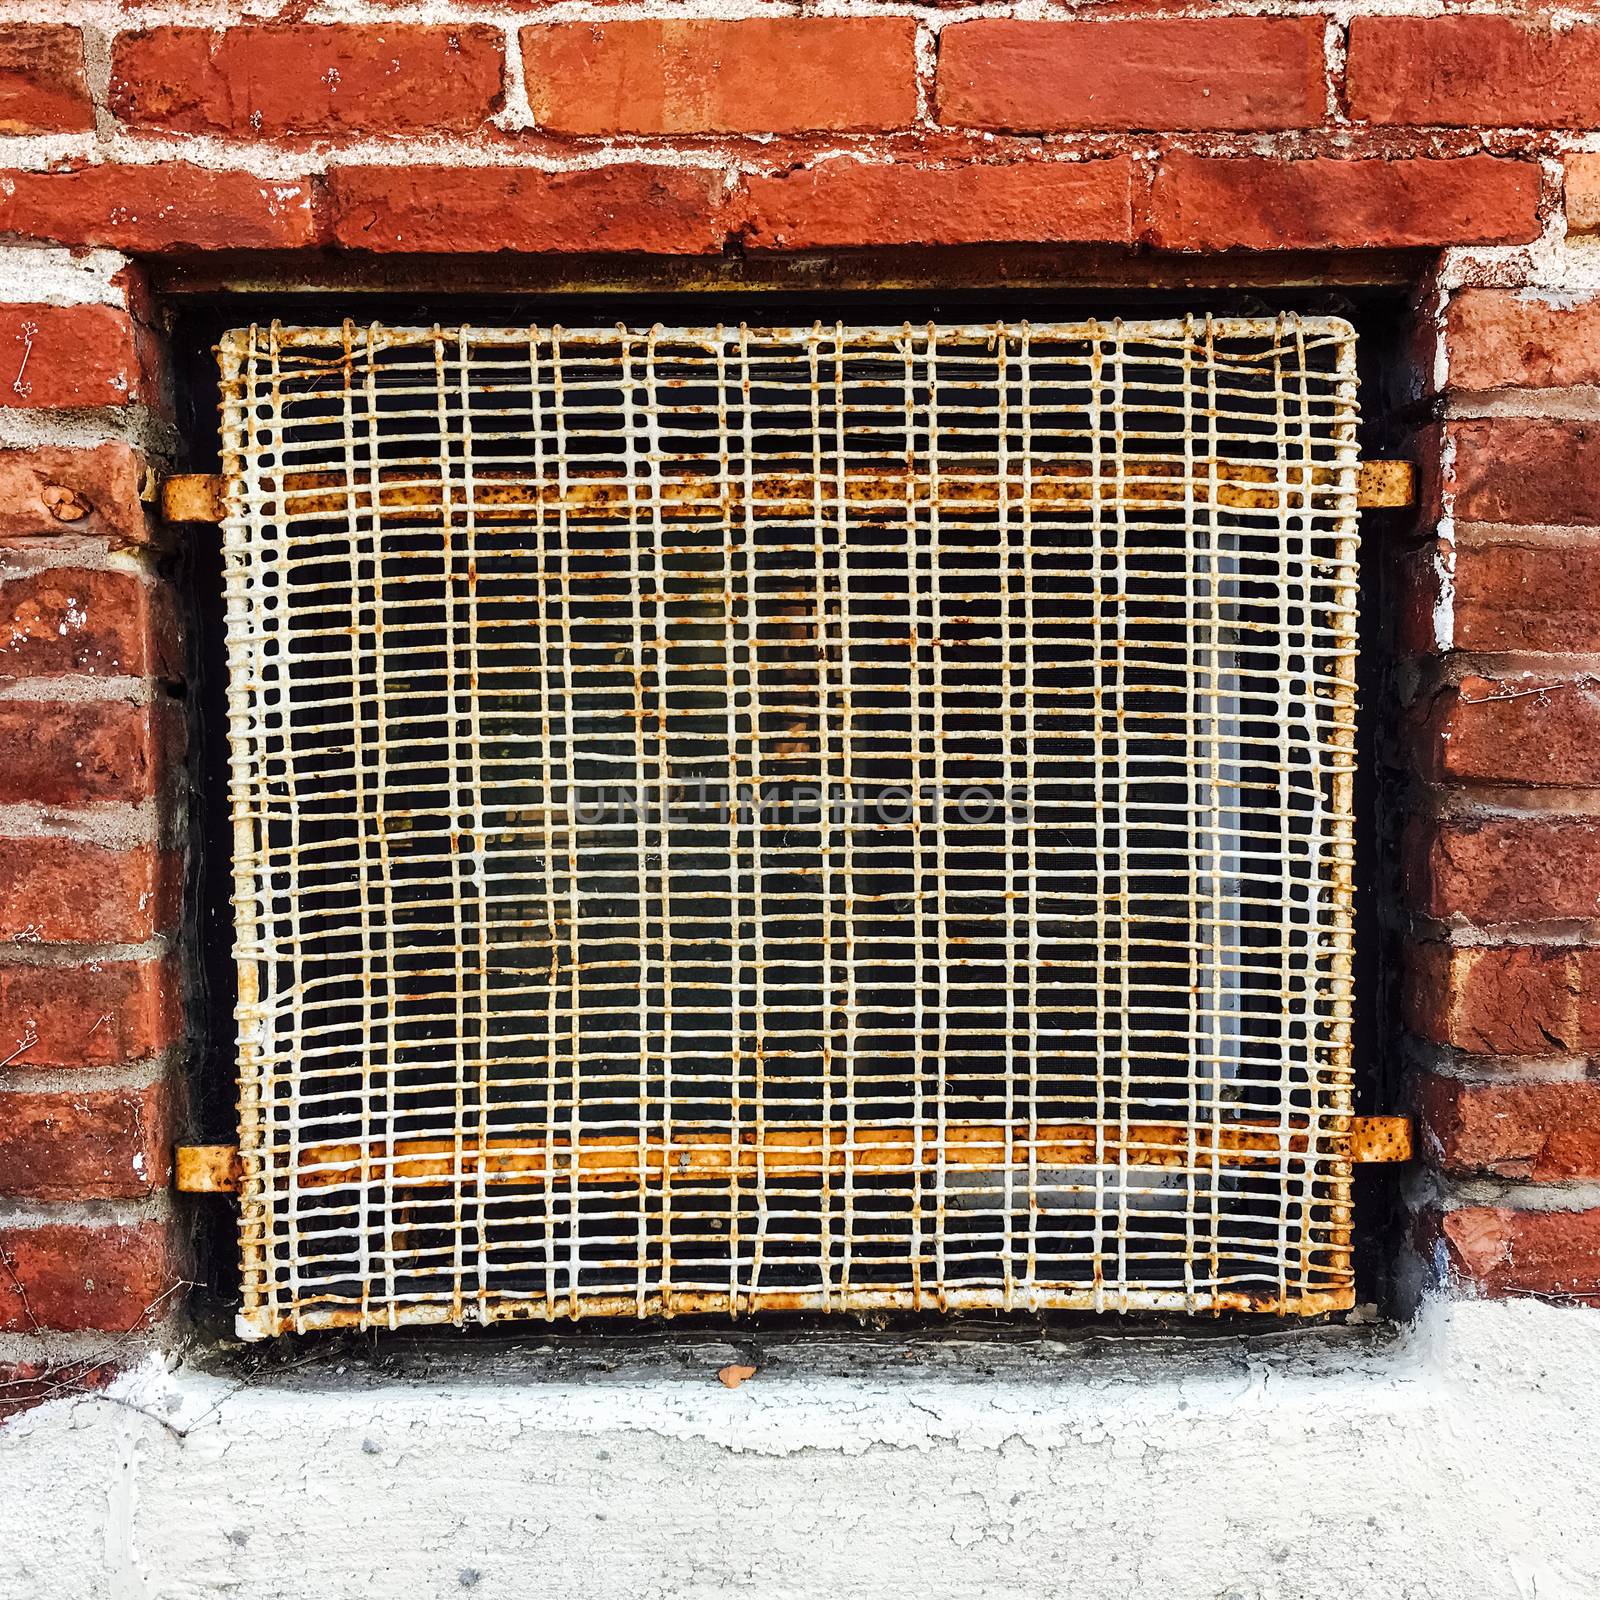 Old wire mesh protecting basement window of a red brick building.